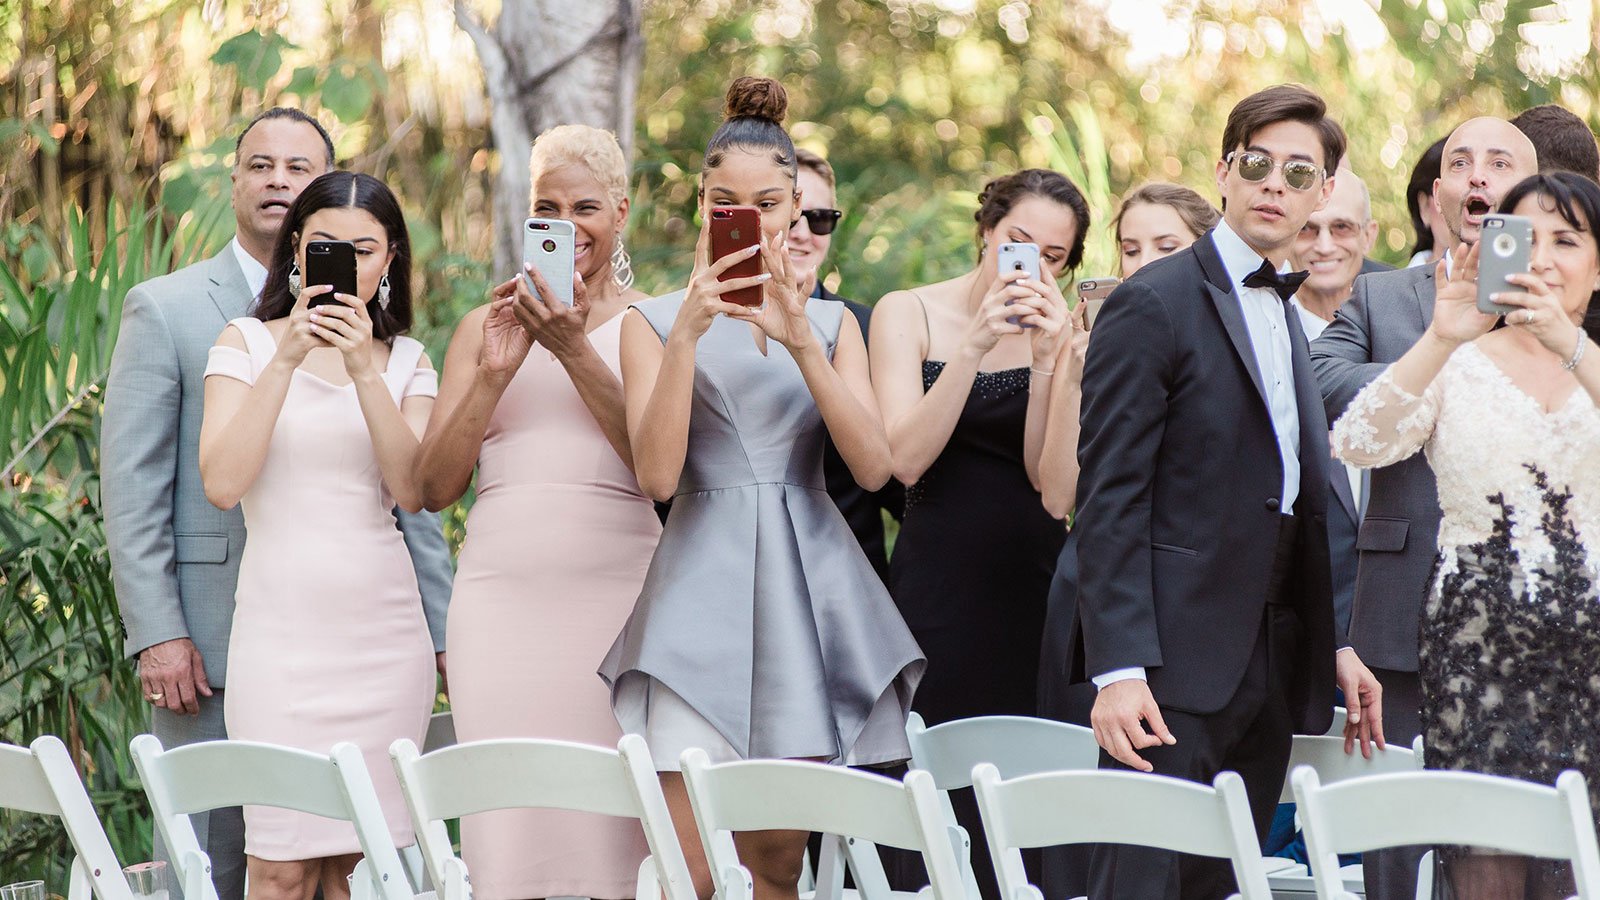 guests with cell phones at wedding ceremony